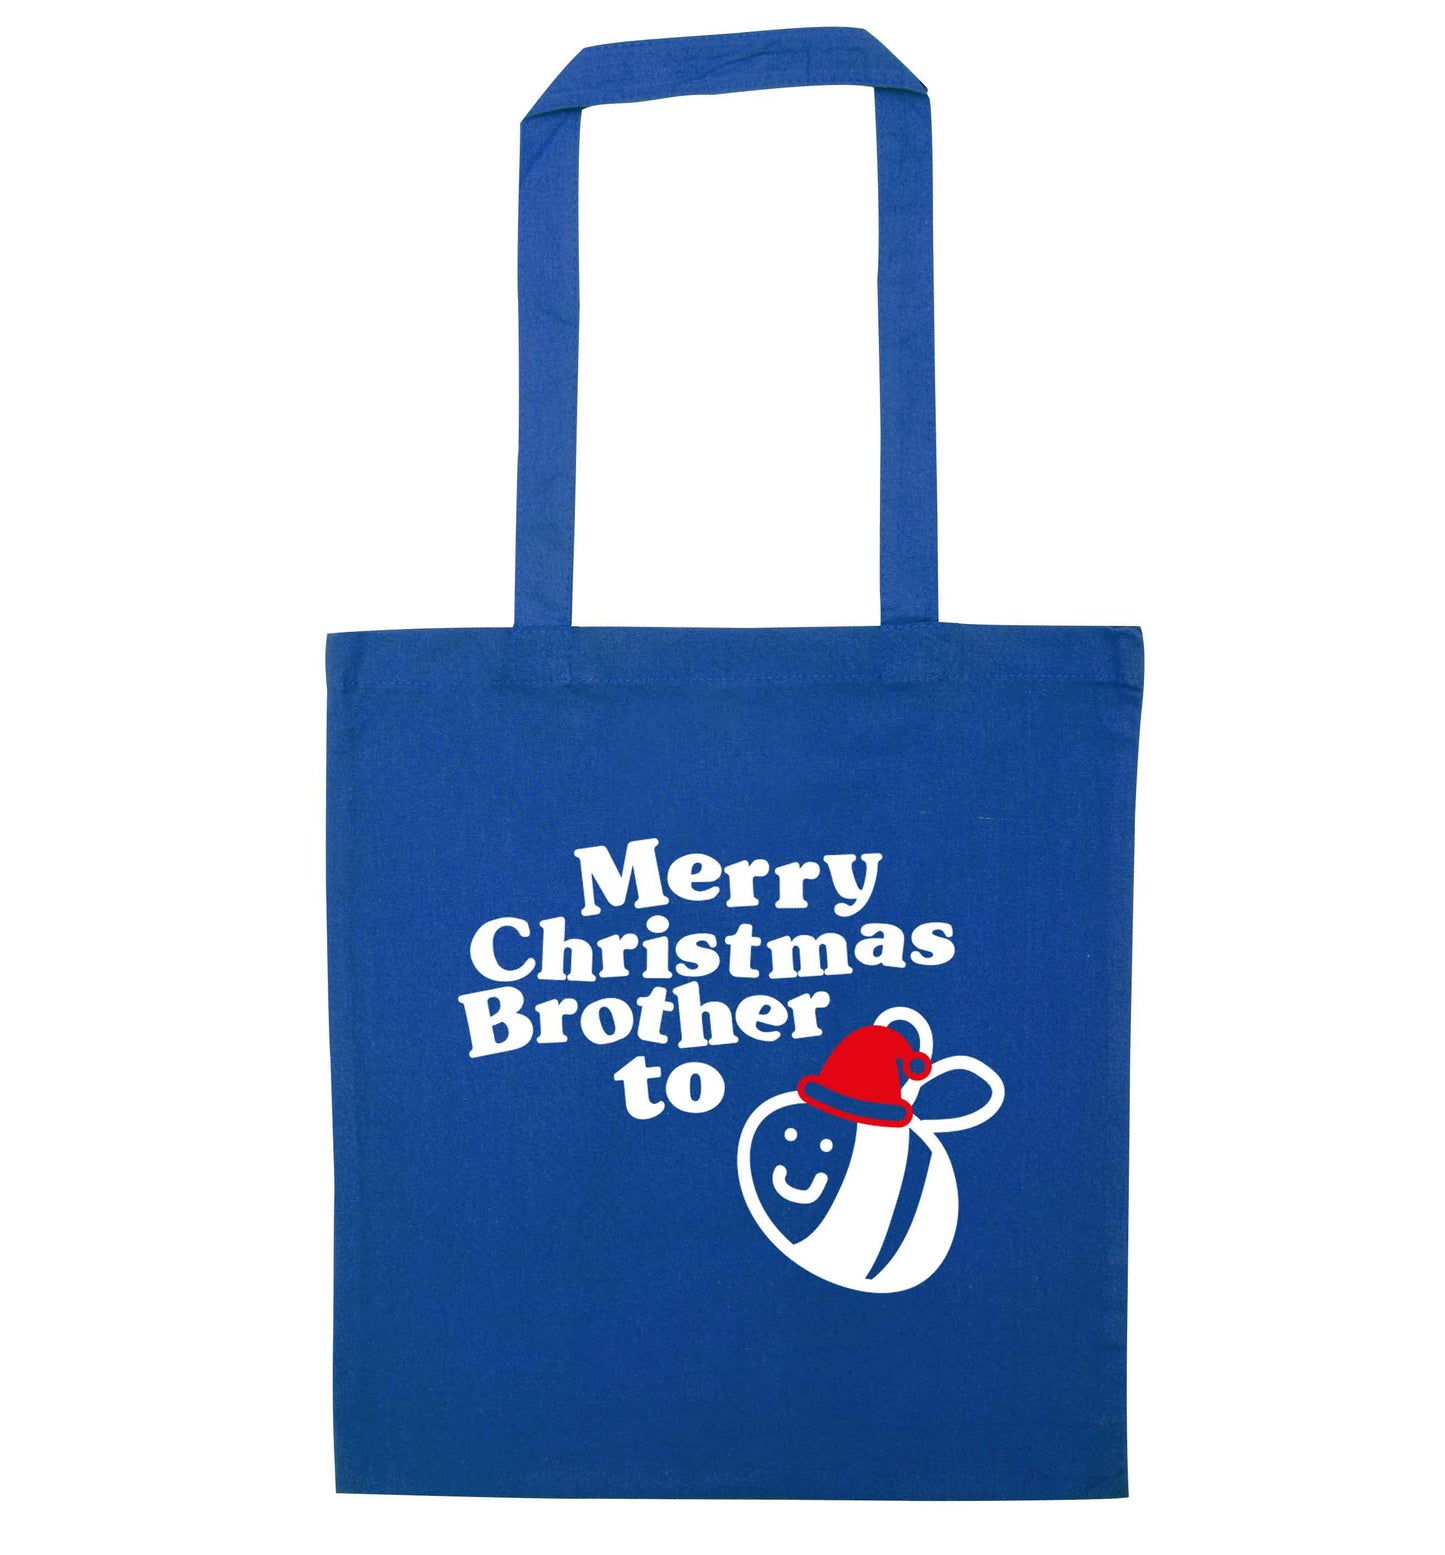 Merry Christmas brother to be blue tote bag